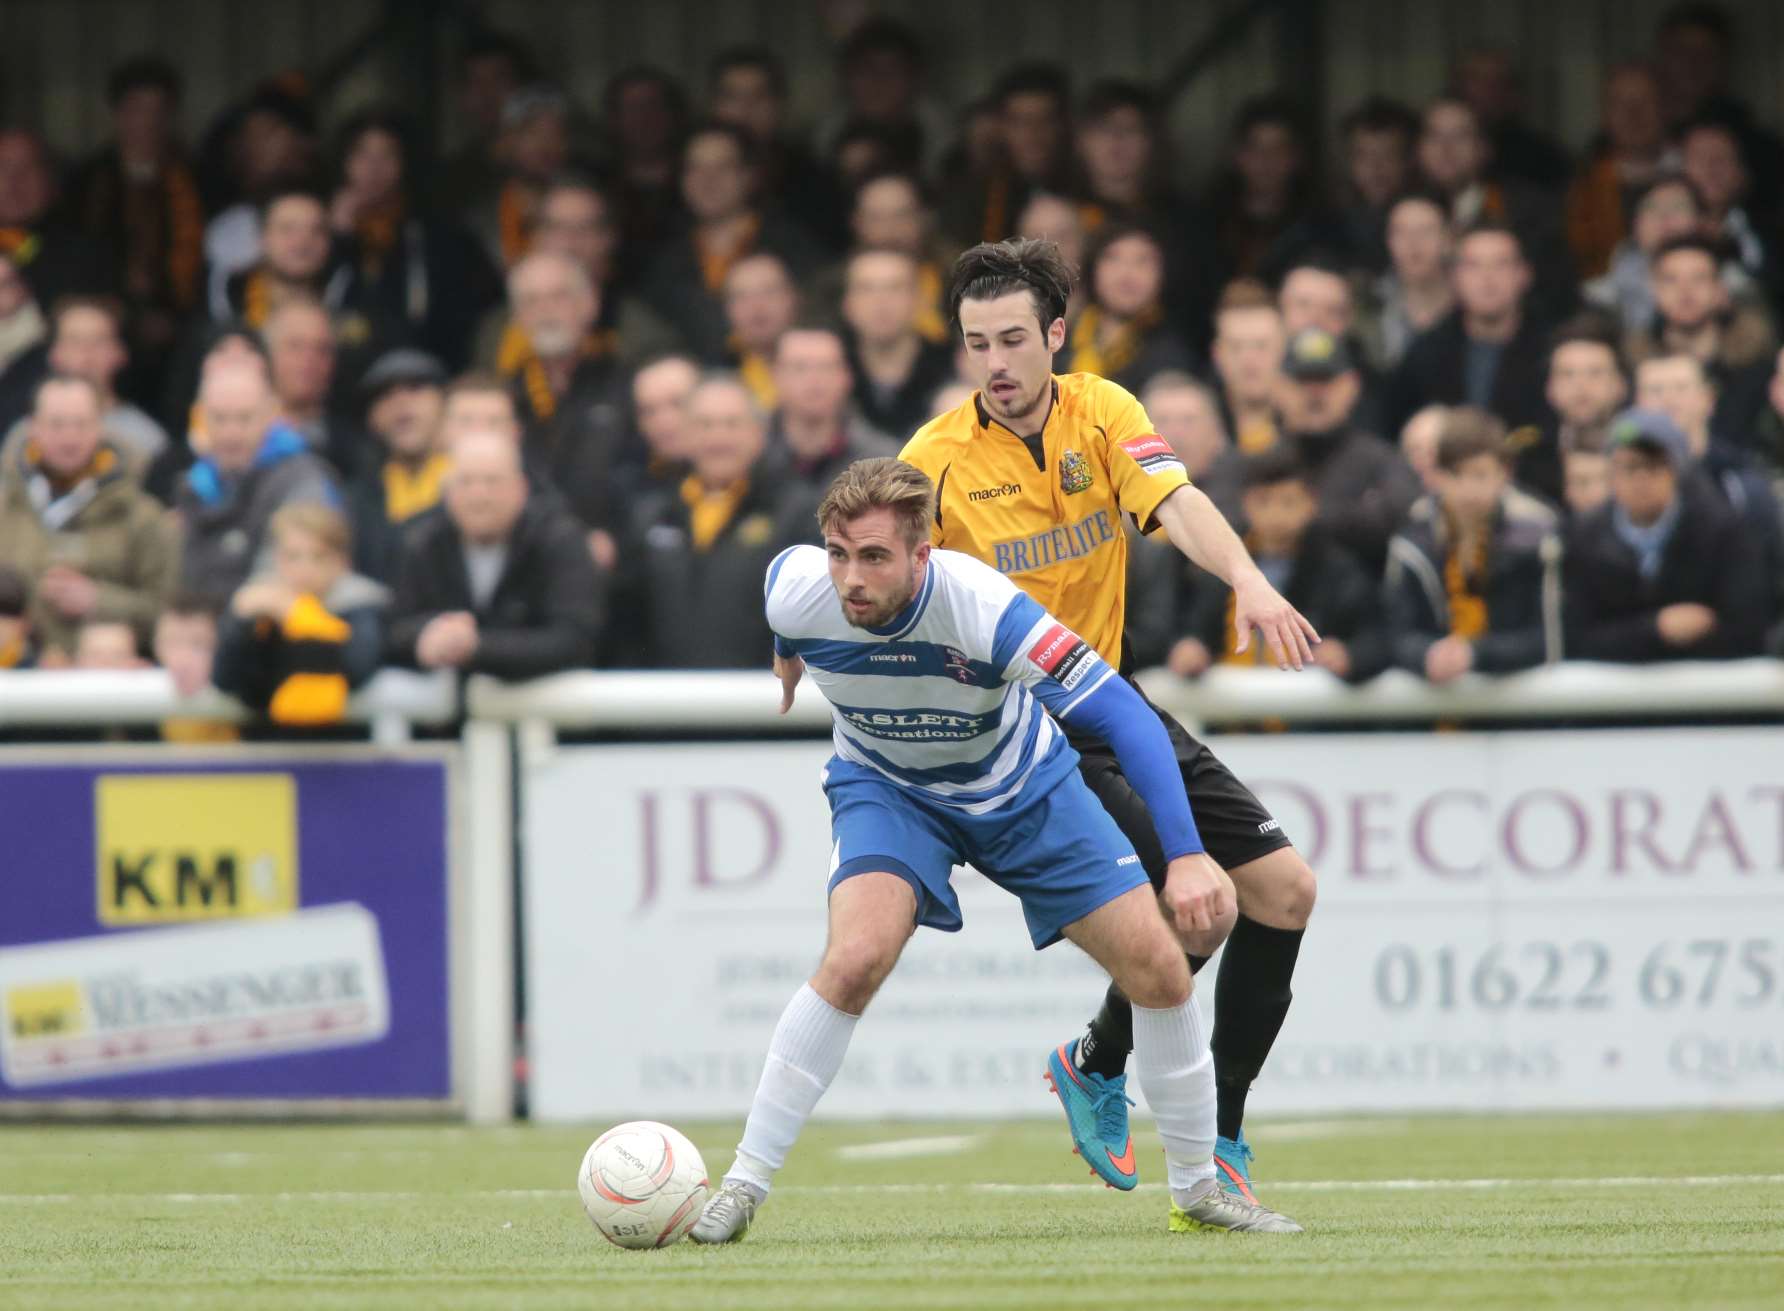 Margate and Maidstone have both been promoted from the Ryman League Picture: Martin Apps